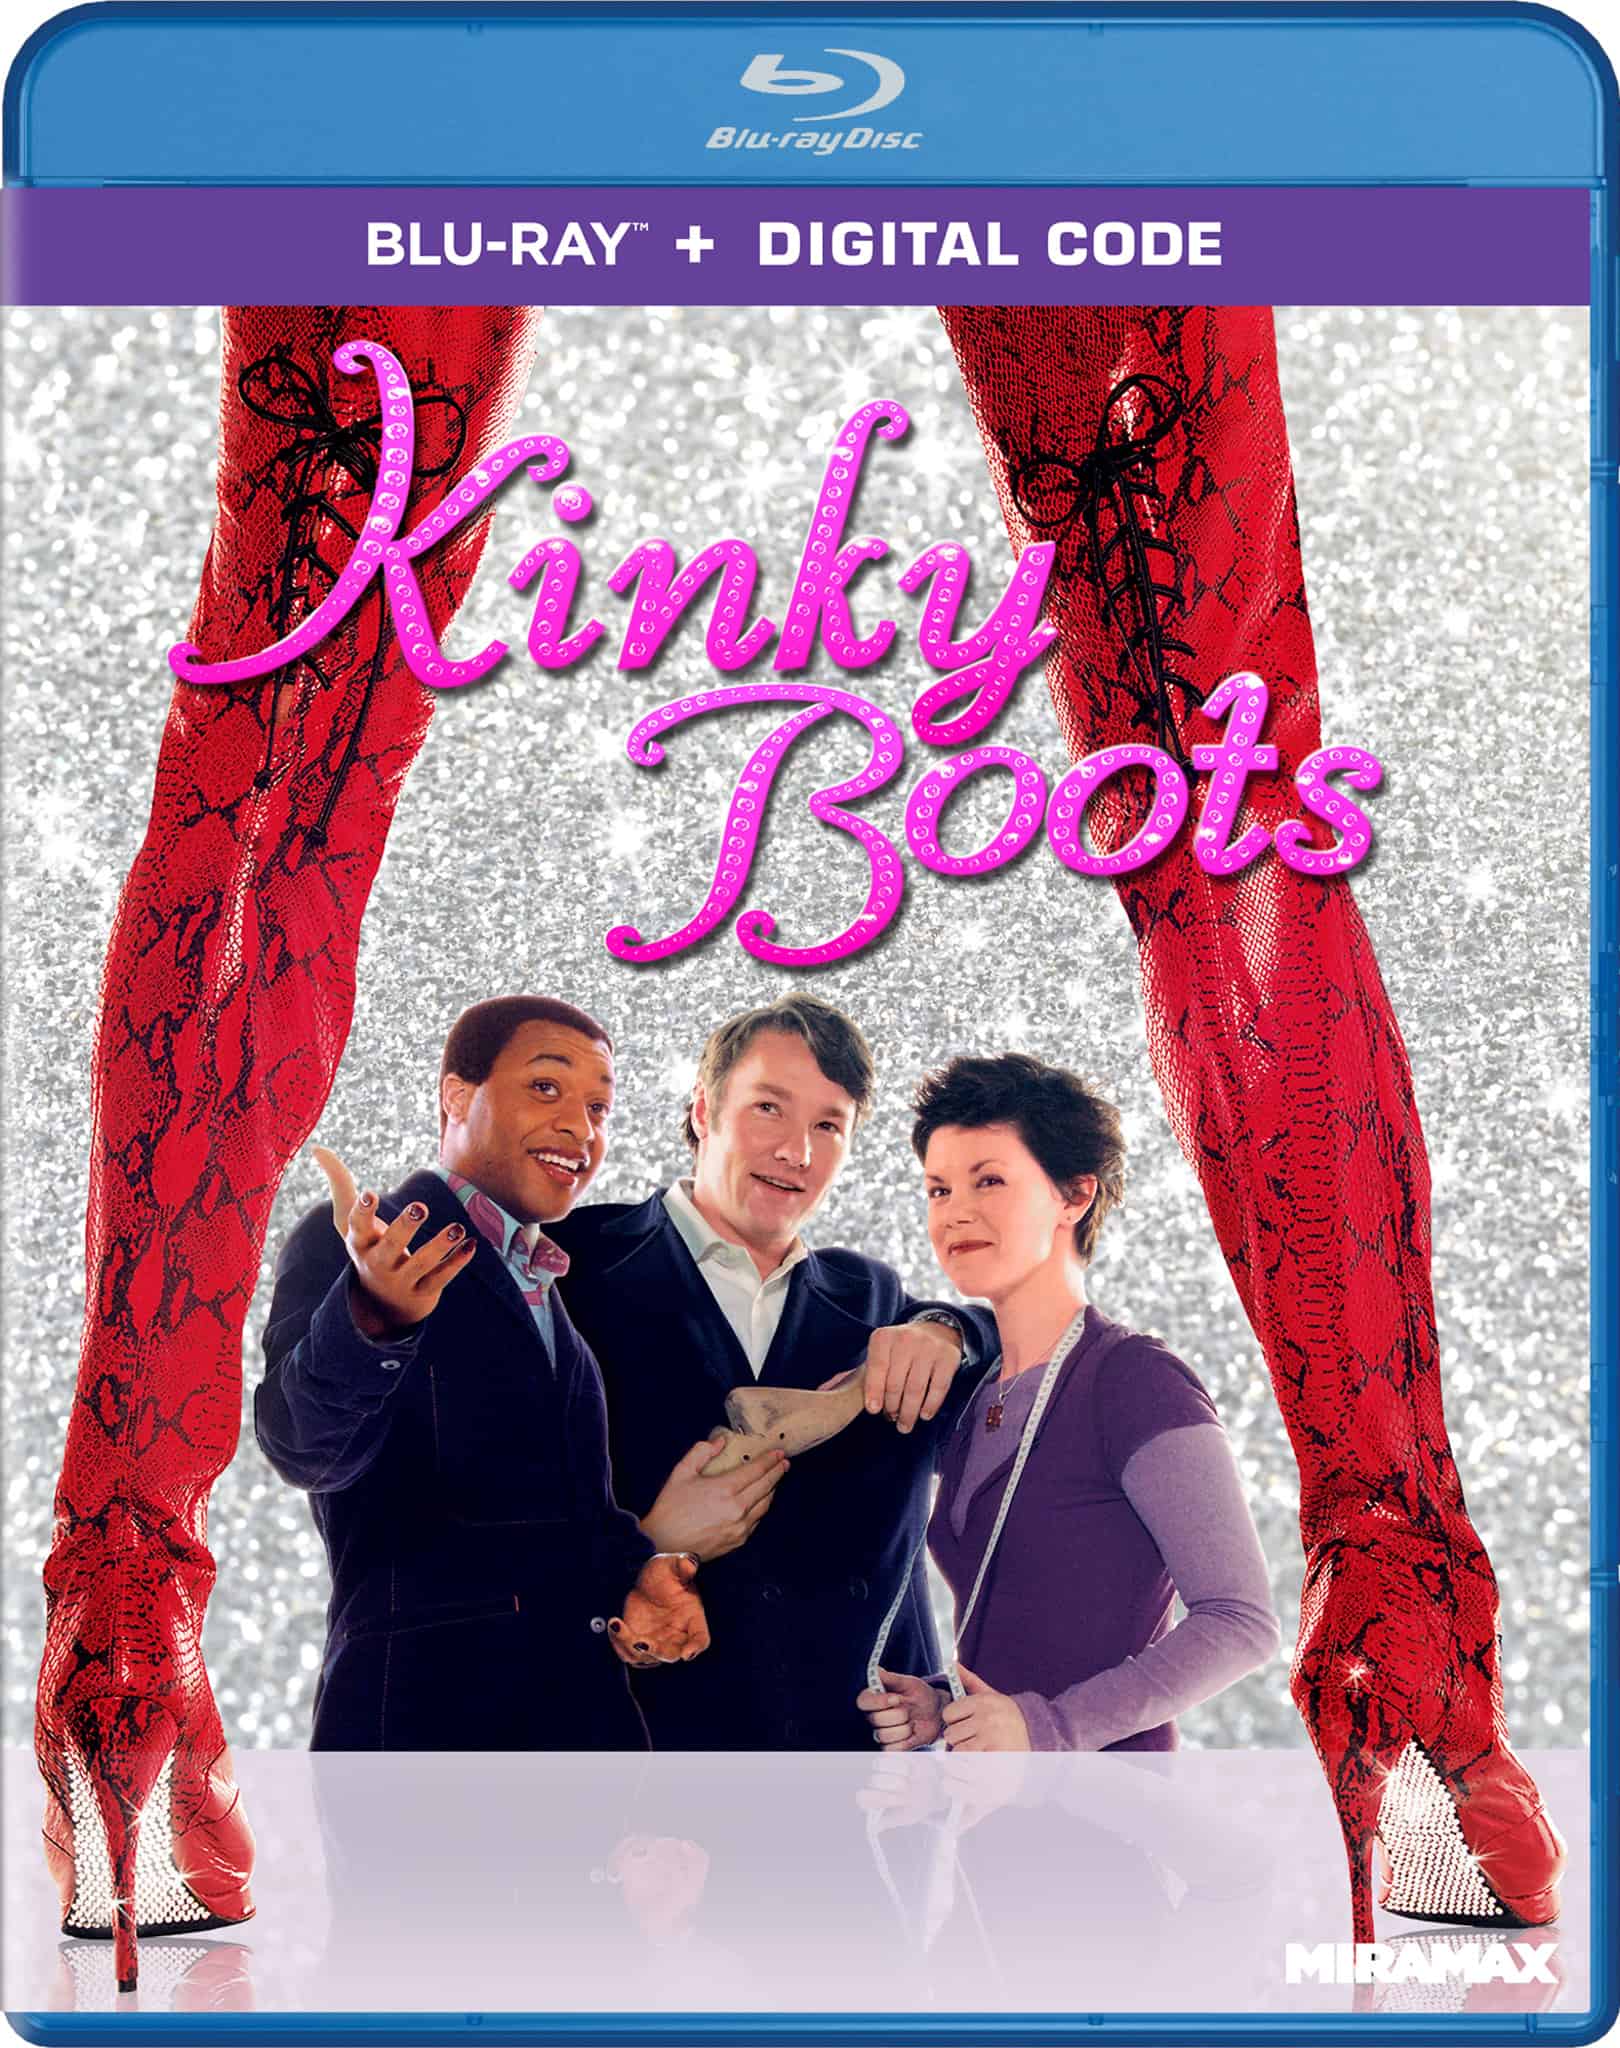 Kinky Boots wonderfully stomps Blu-ray on May 31st 1